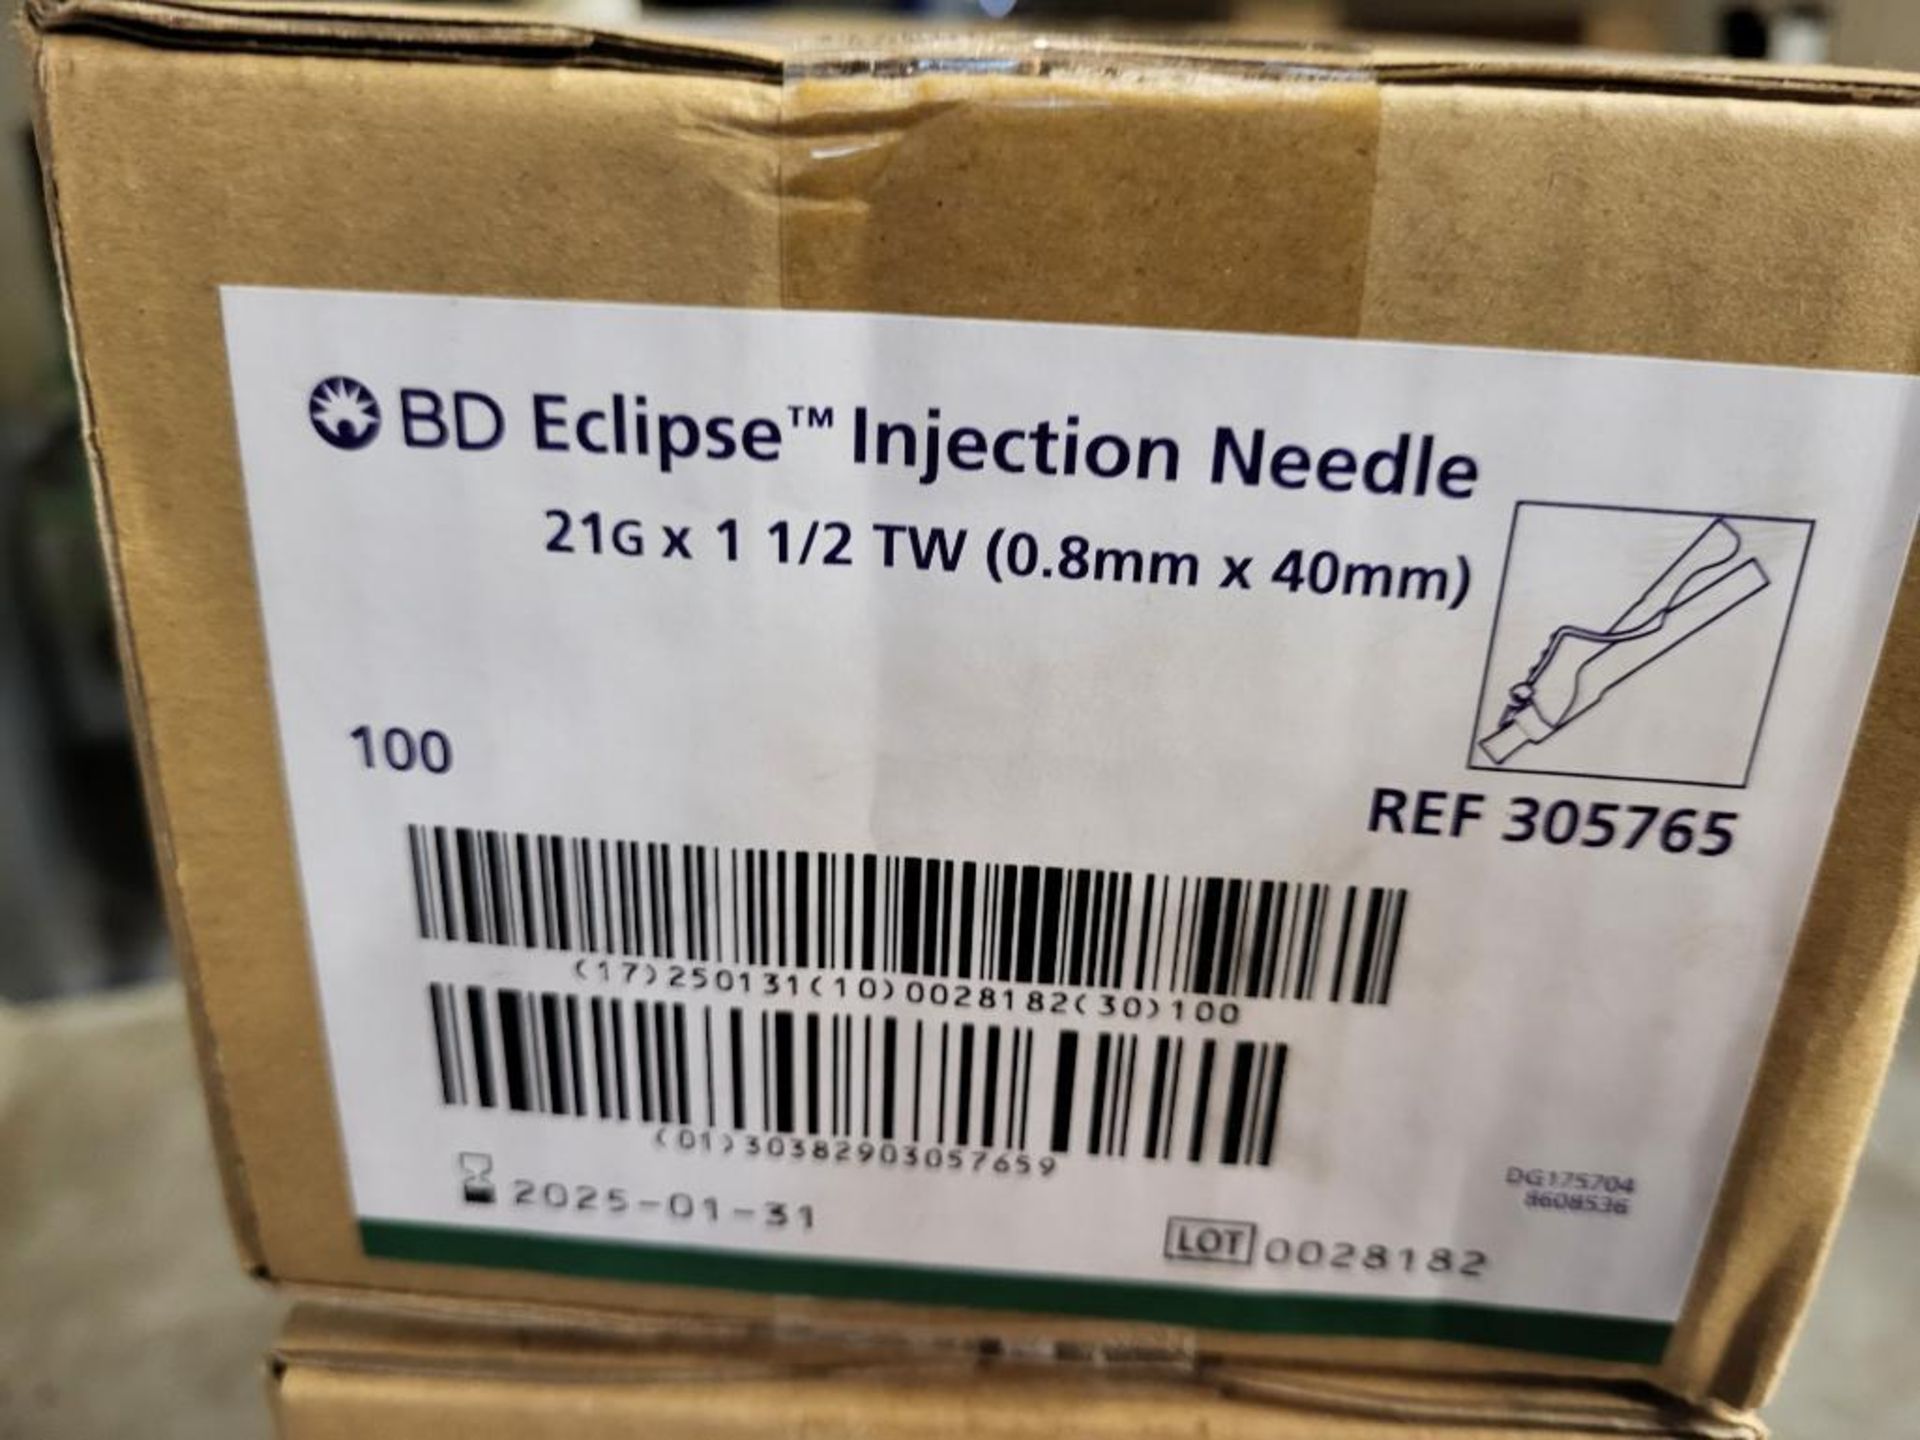 New Boxes of 100 BD Eclipse Injection Needles 21G x 1 1/2 TW